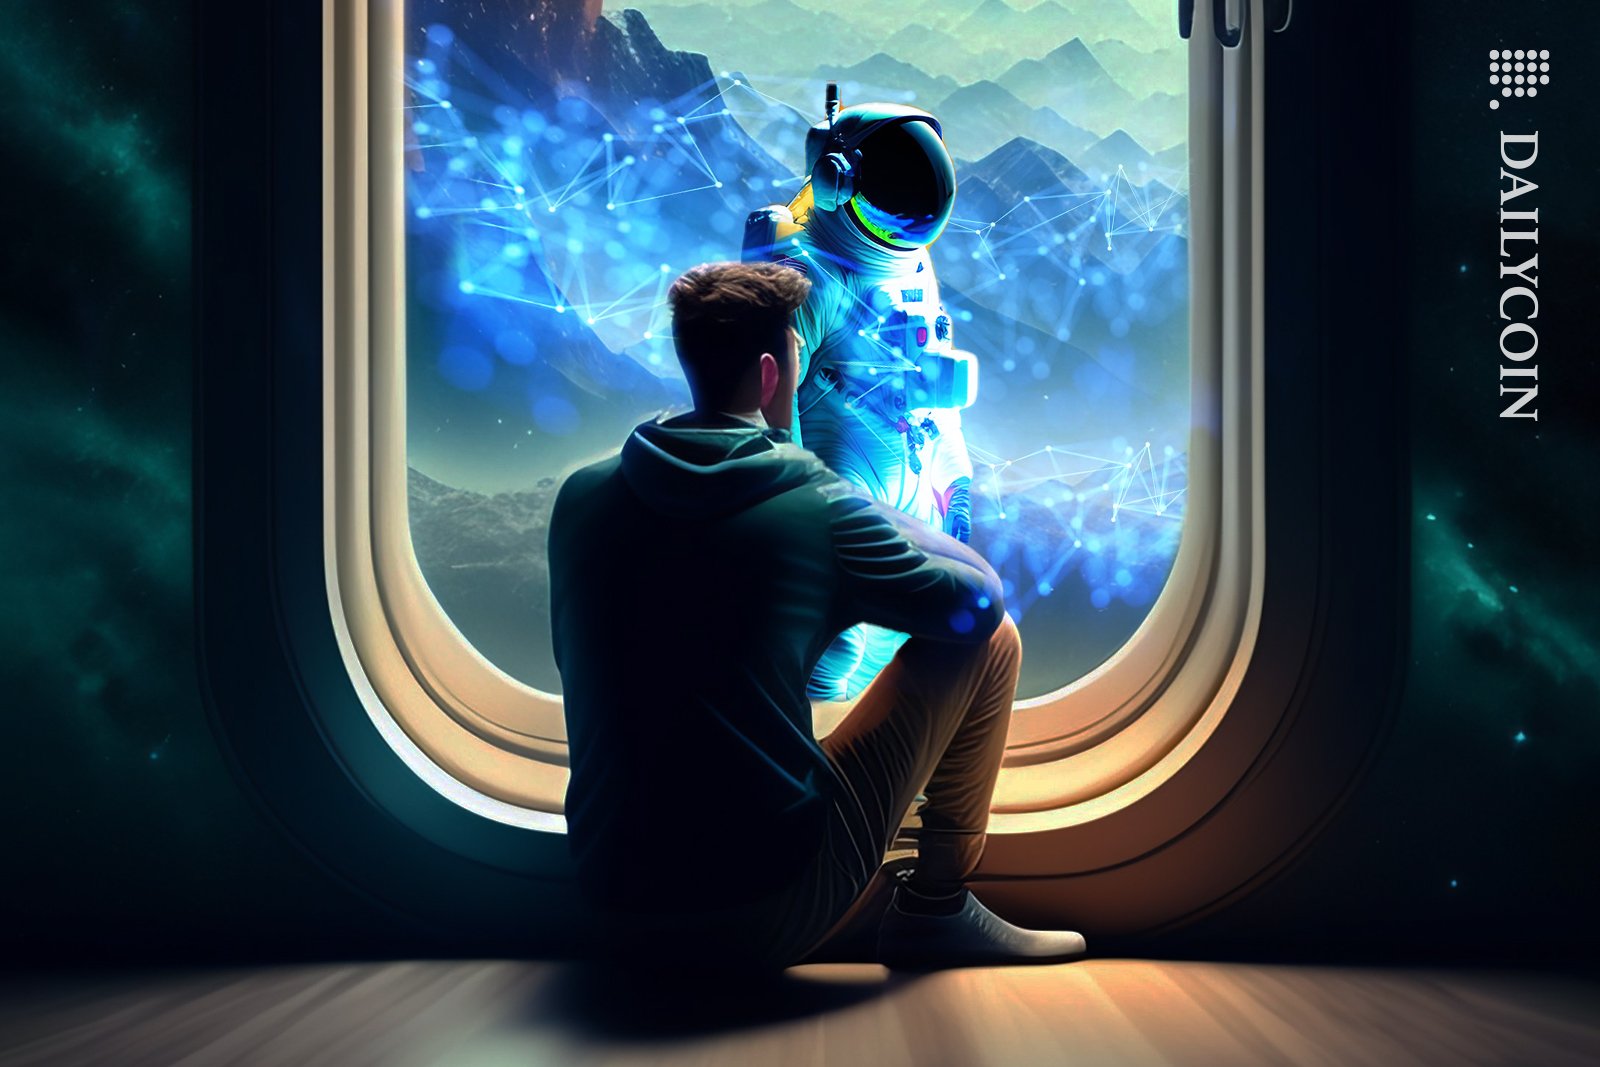 A Man sitting in front of an aquarium window, looking out at another man in an aqua suit surrounded by blockchain-shaped waves.